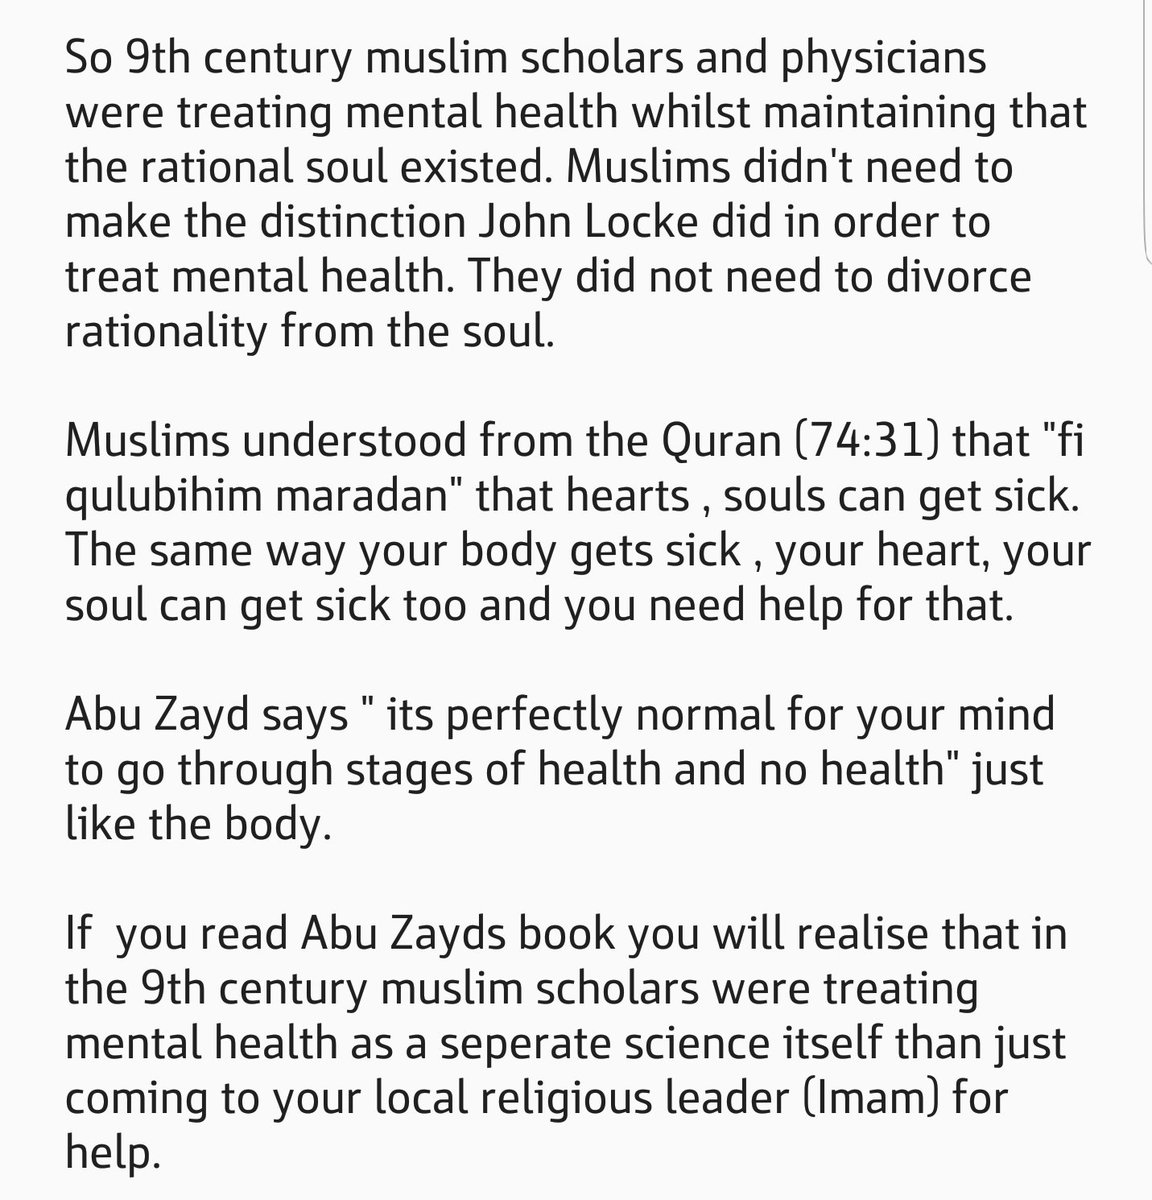 7) So 9th century Islamic scholars and physicians were treating mental health issues whlist maintaining the rational soul existed: